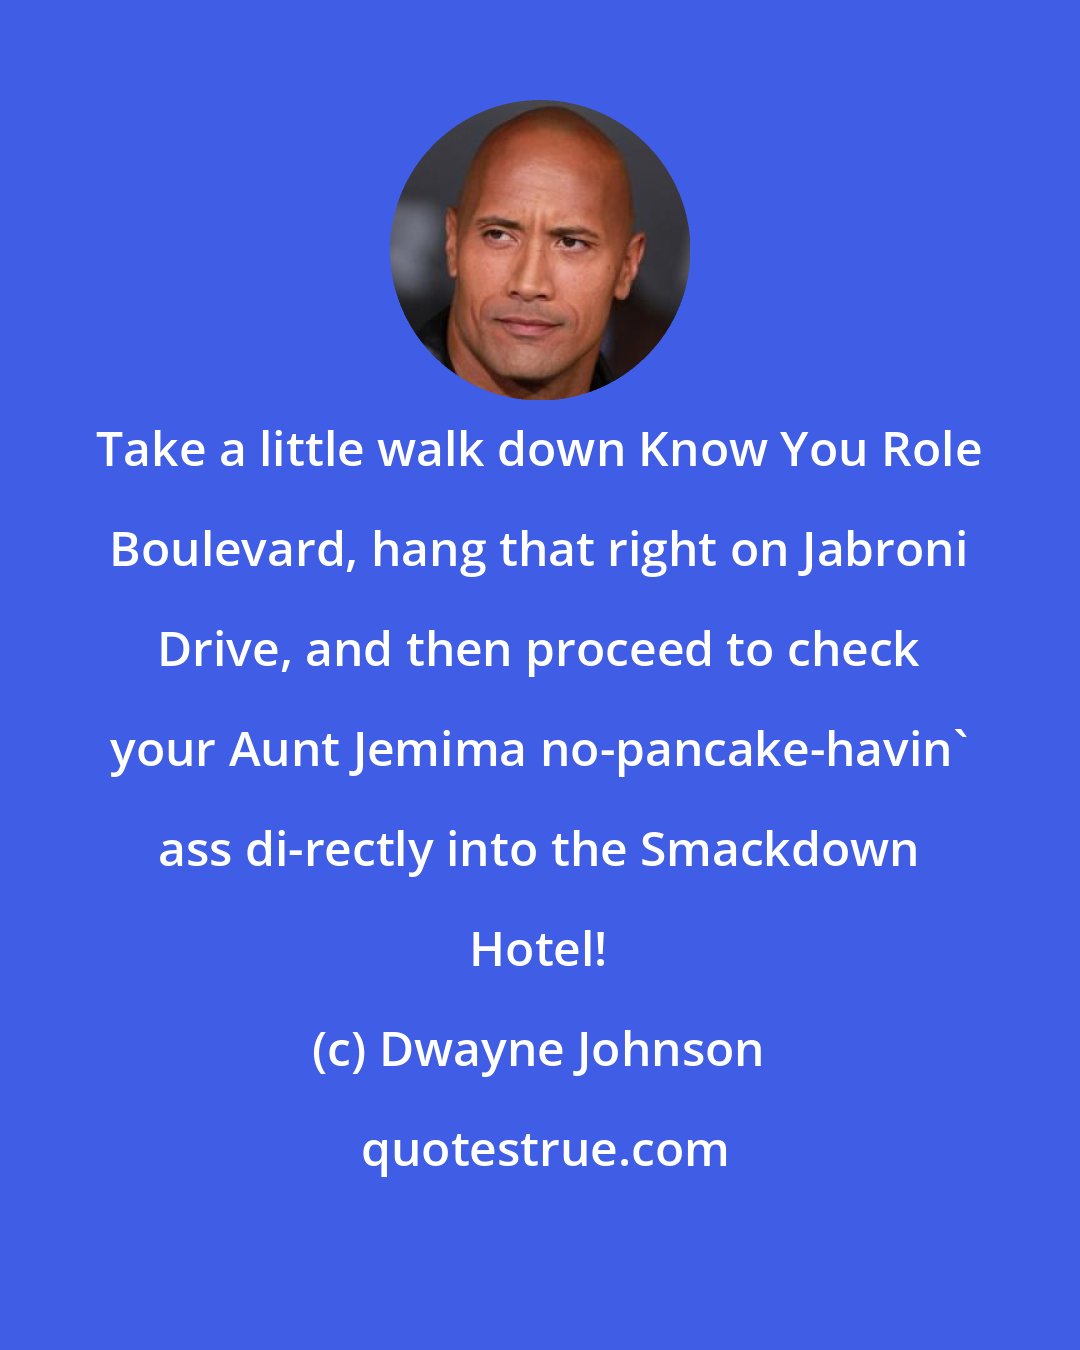 Dwayne Johnson: Take a little walk down Know You Role Boulevard, hang that right on Jabroni Drive, and then proceed to check your Aunt Jemima no-pancake-havin' ass di-rectly into the Smackdown Hotel!